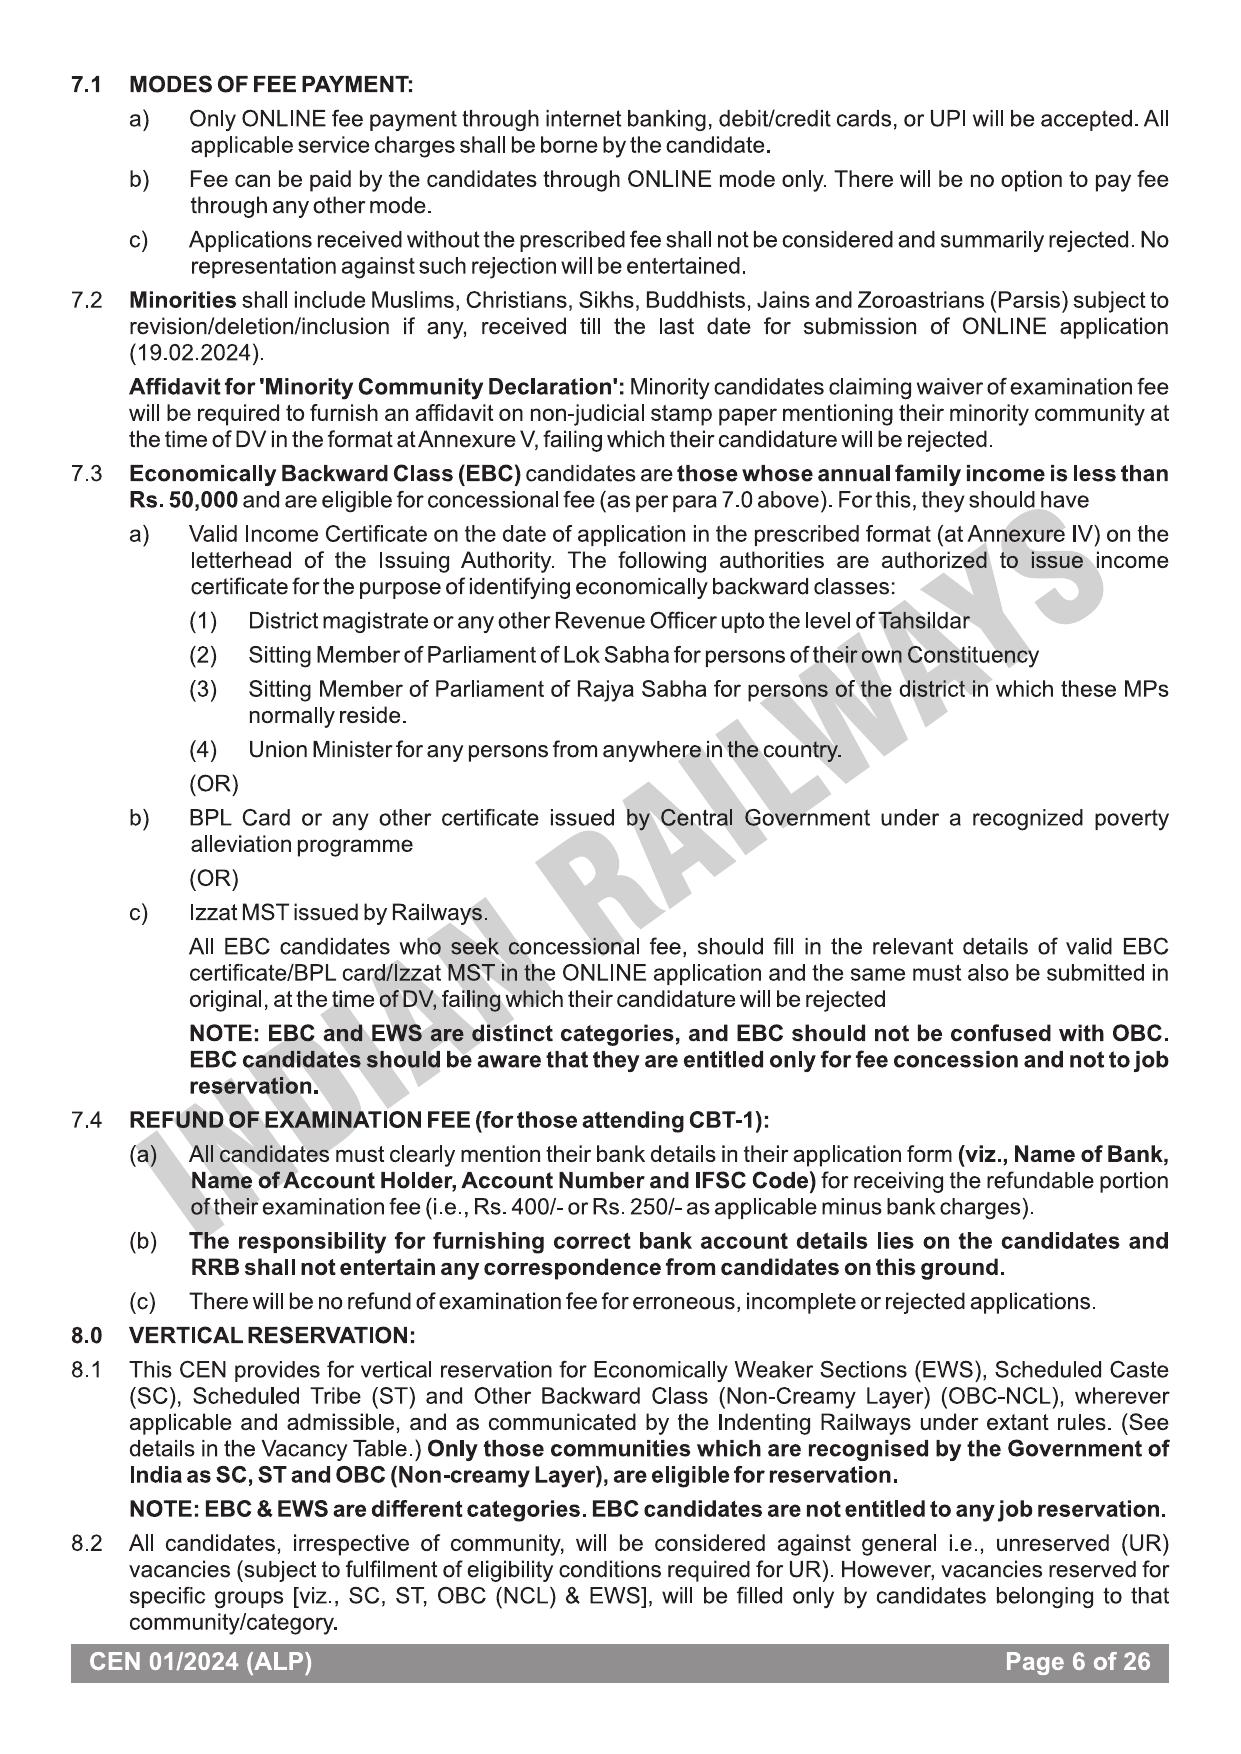 RRB ALP Recruitment 2024 Notification: Railways Assistant Loco Pilot Eligibility, Salary - Page 7